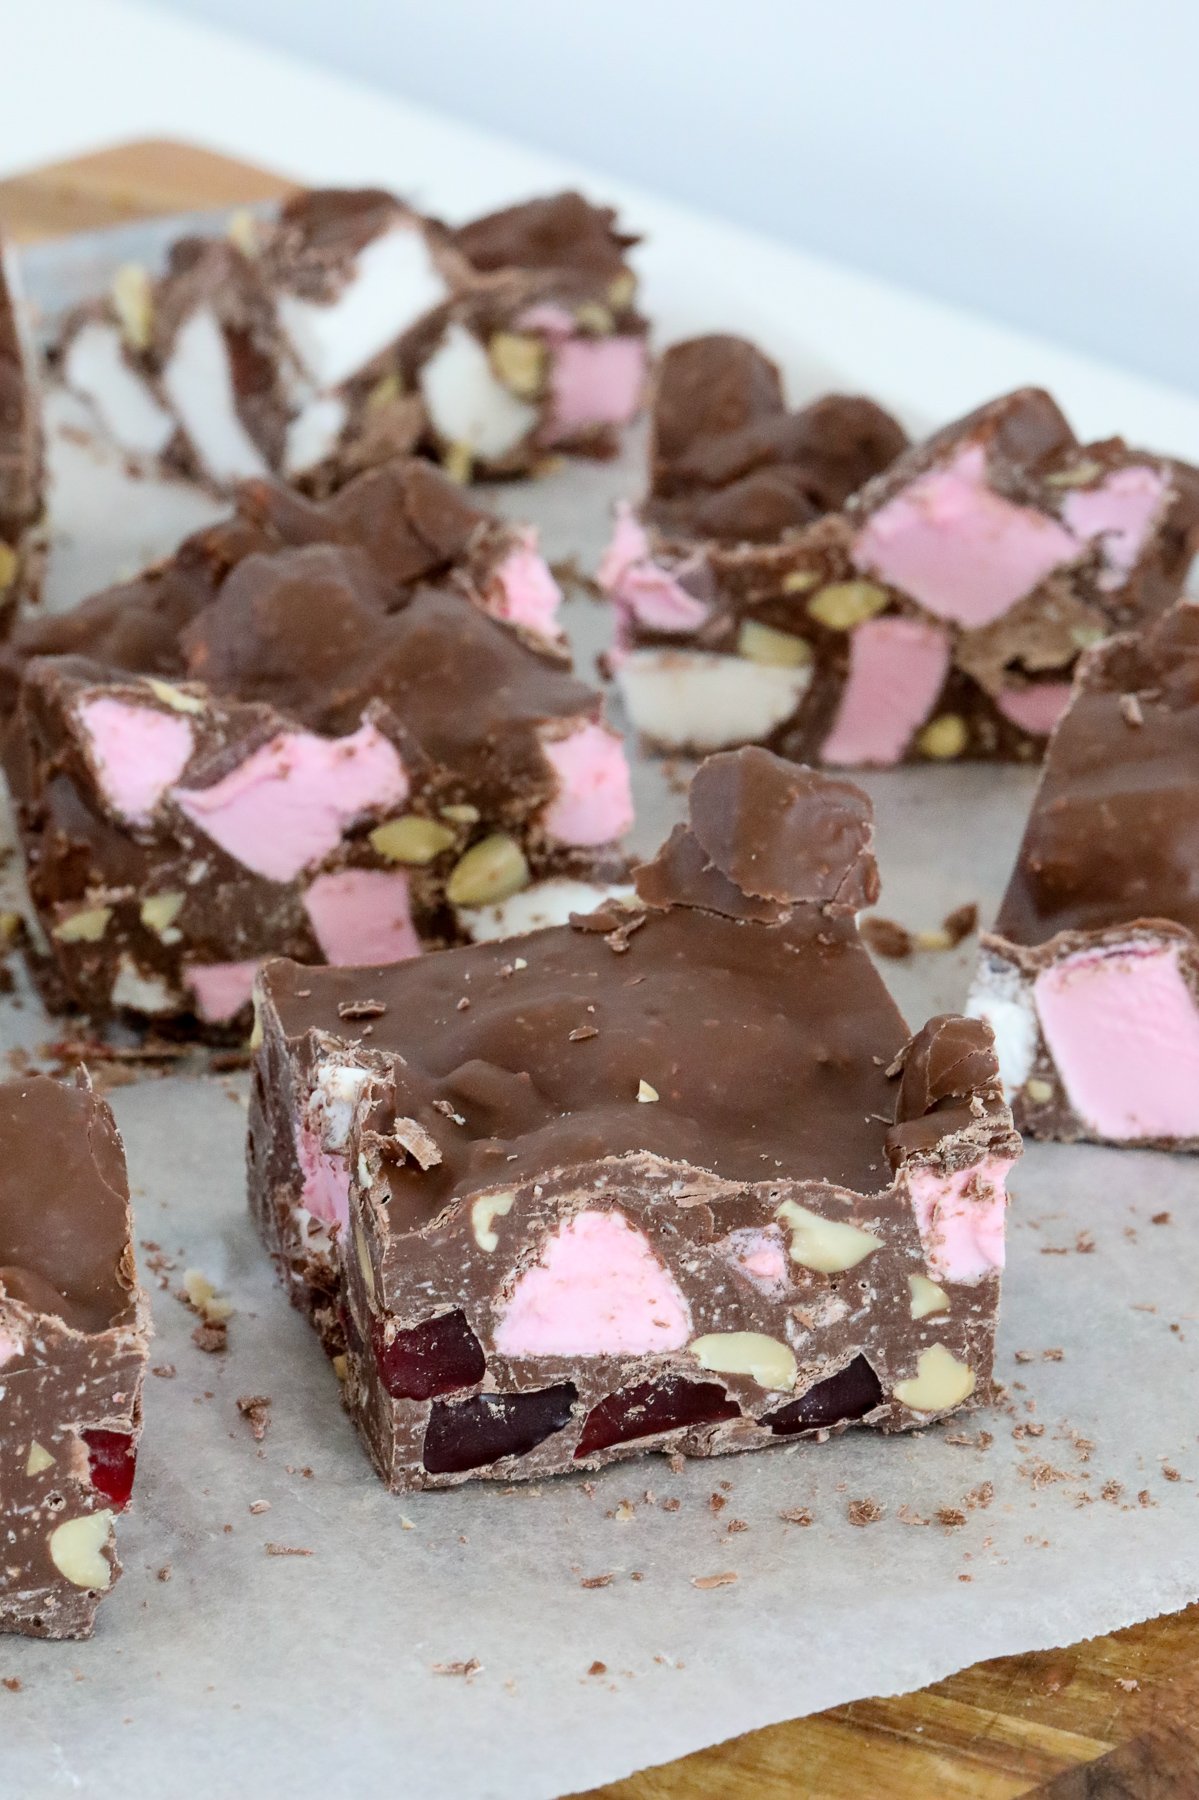 A piece of chocolate slice with marshmallows and nuts.